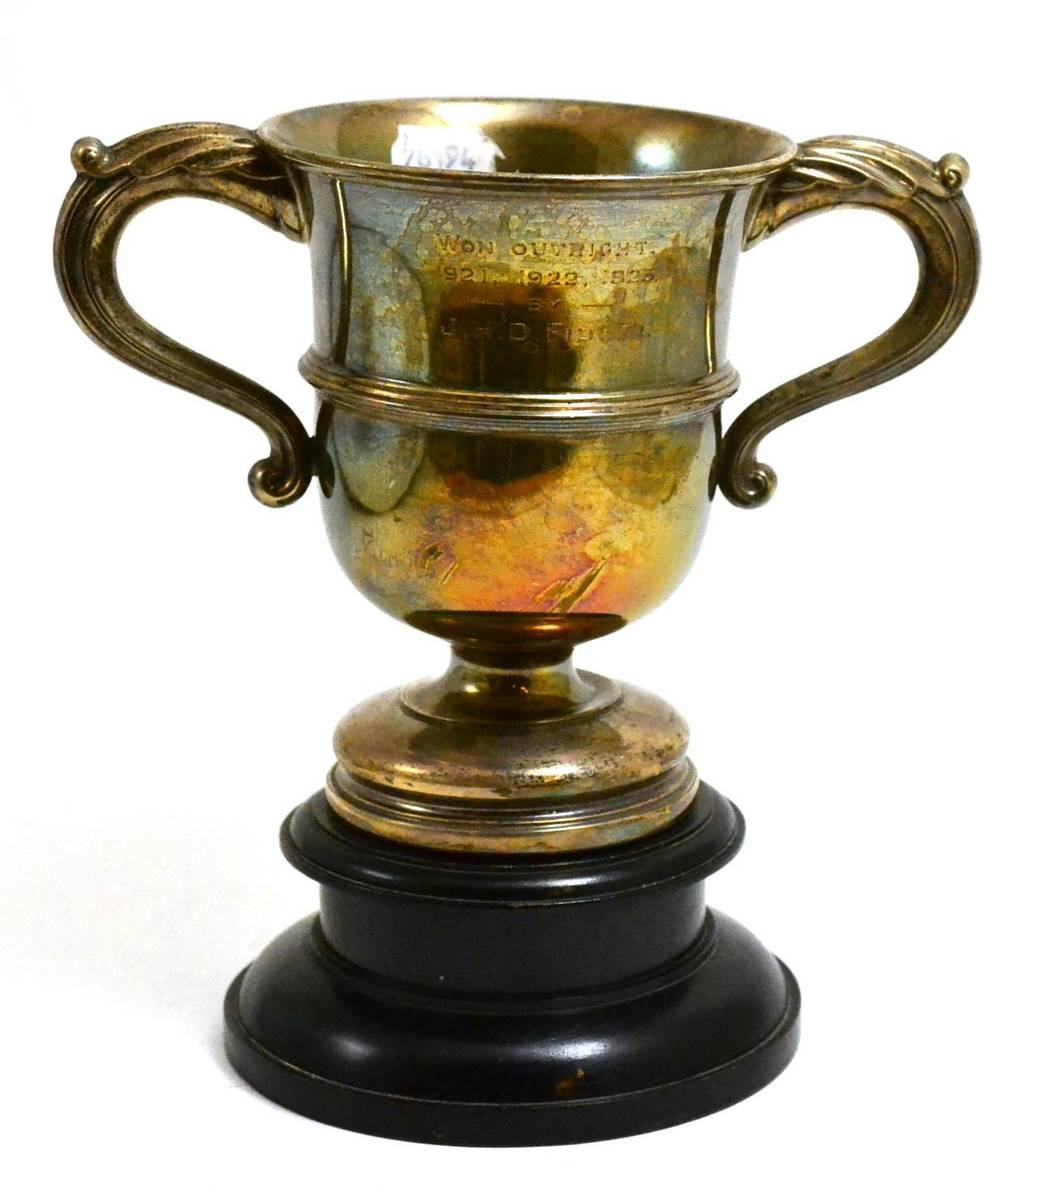 Lot 323 - A silver trophy cup presented by J A Player, 1920